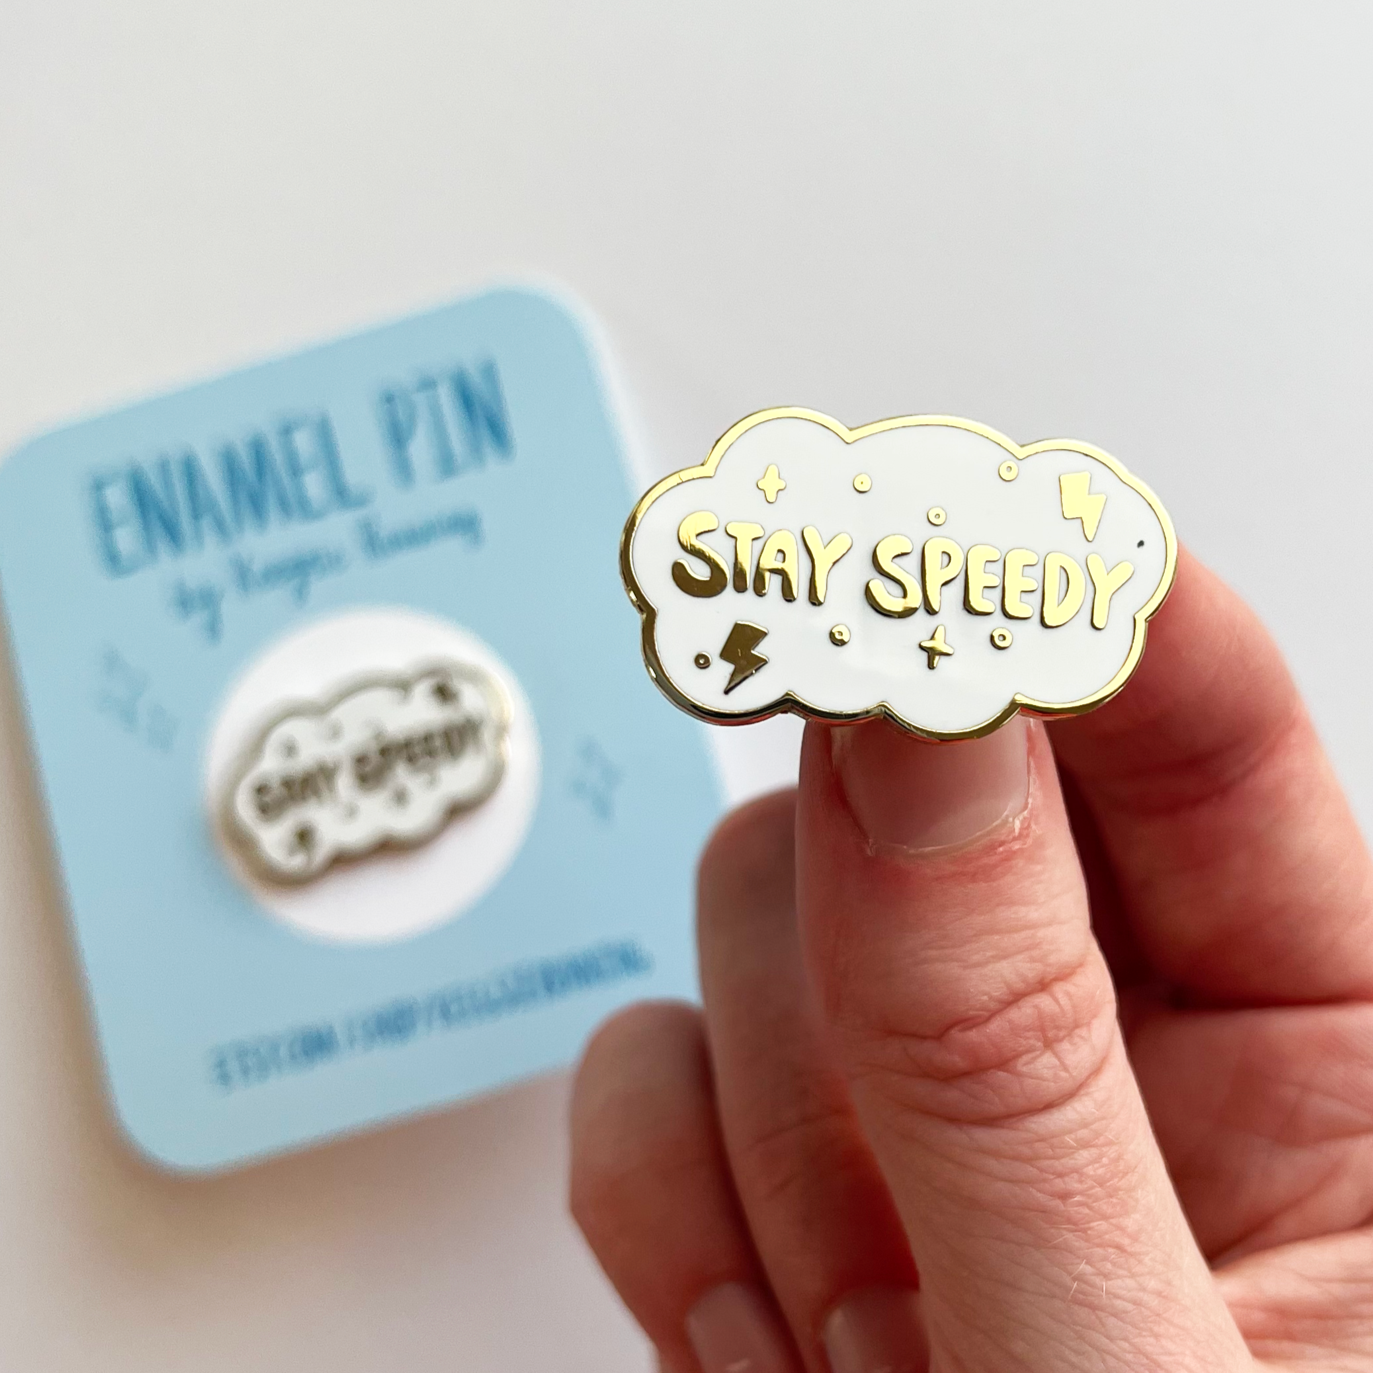 Stay speedy enamel pin. Shaped like a white cloud with gold text.